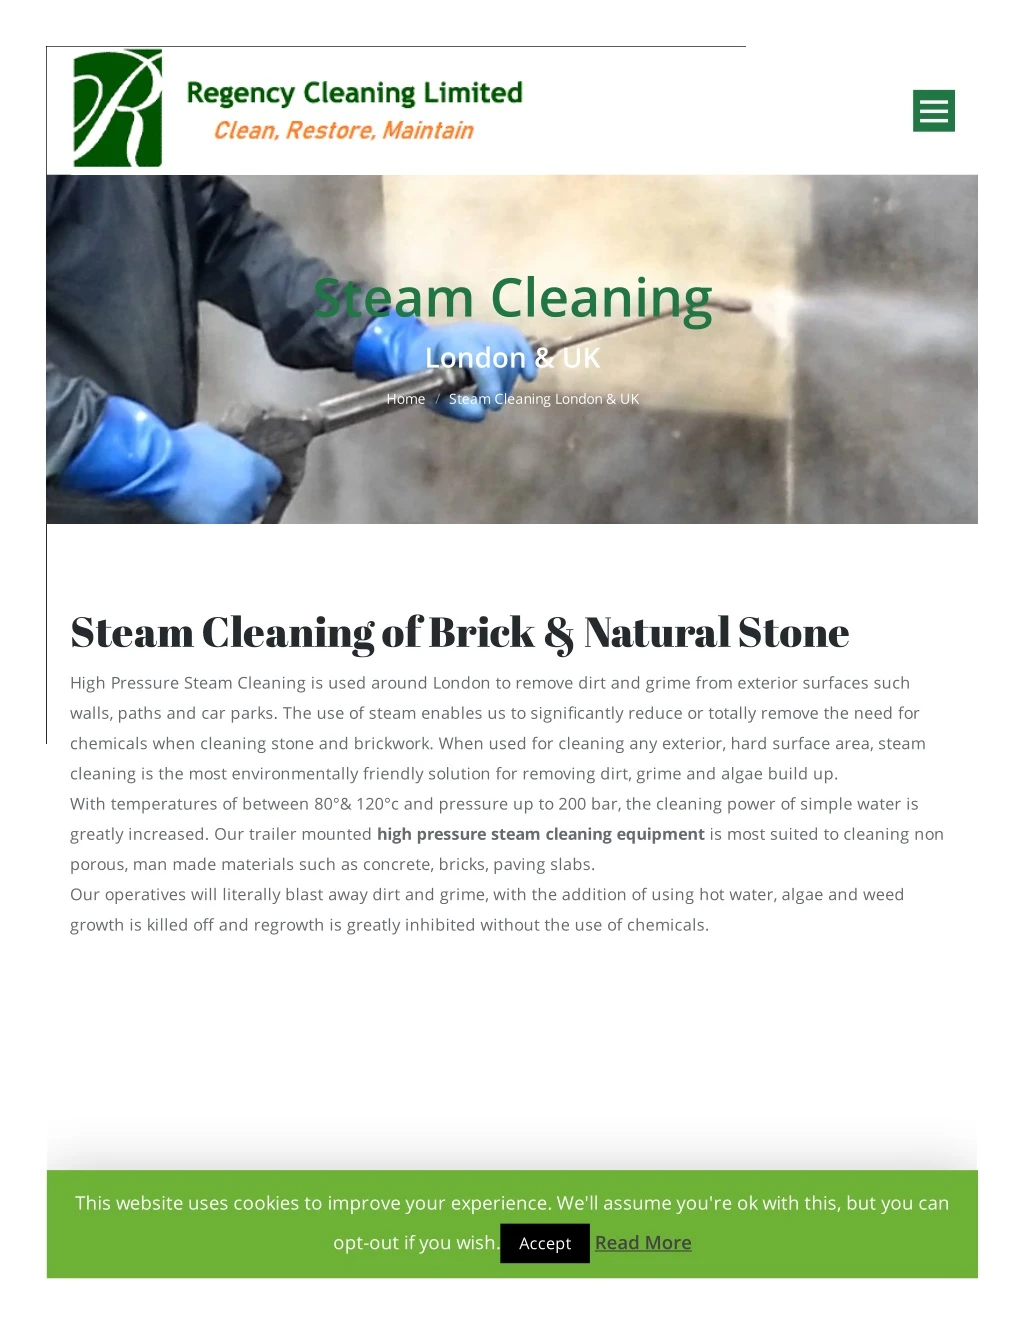 steam cleaning london uk